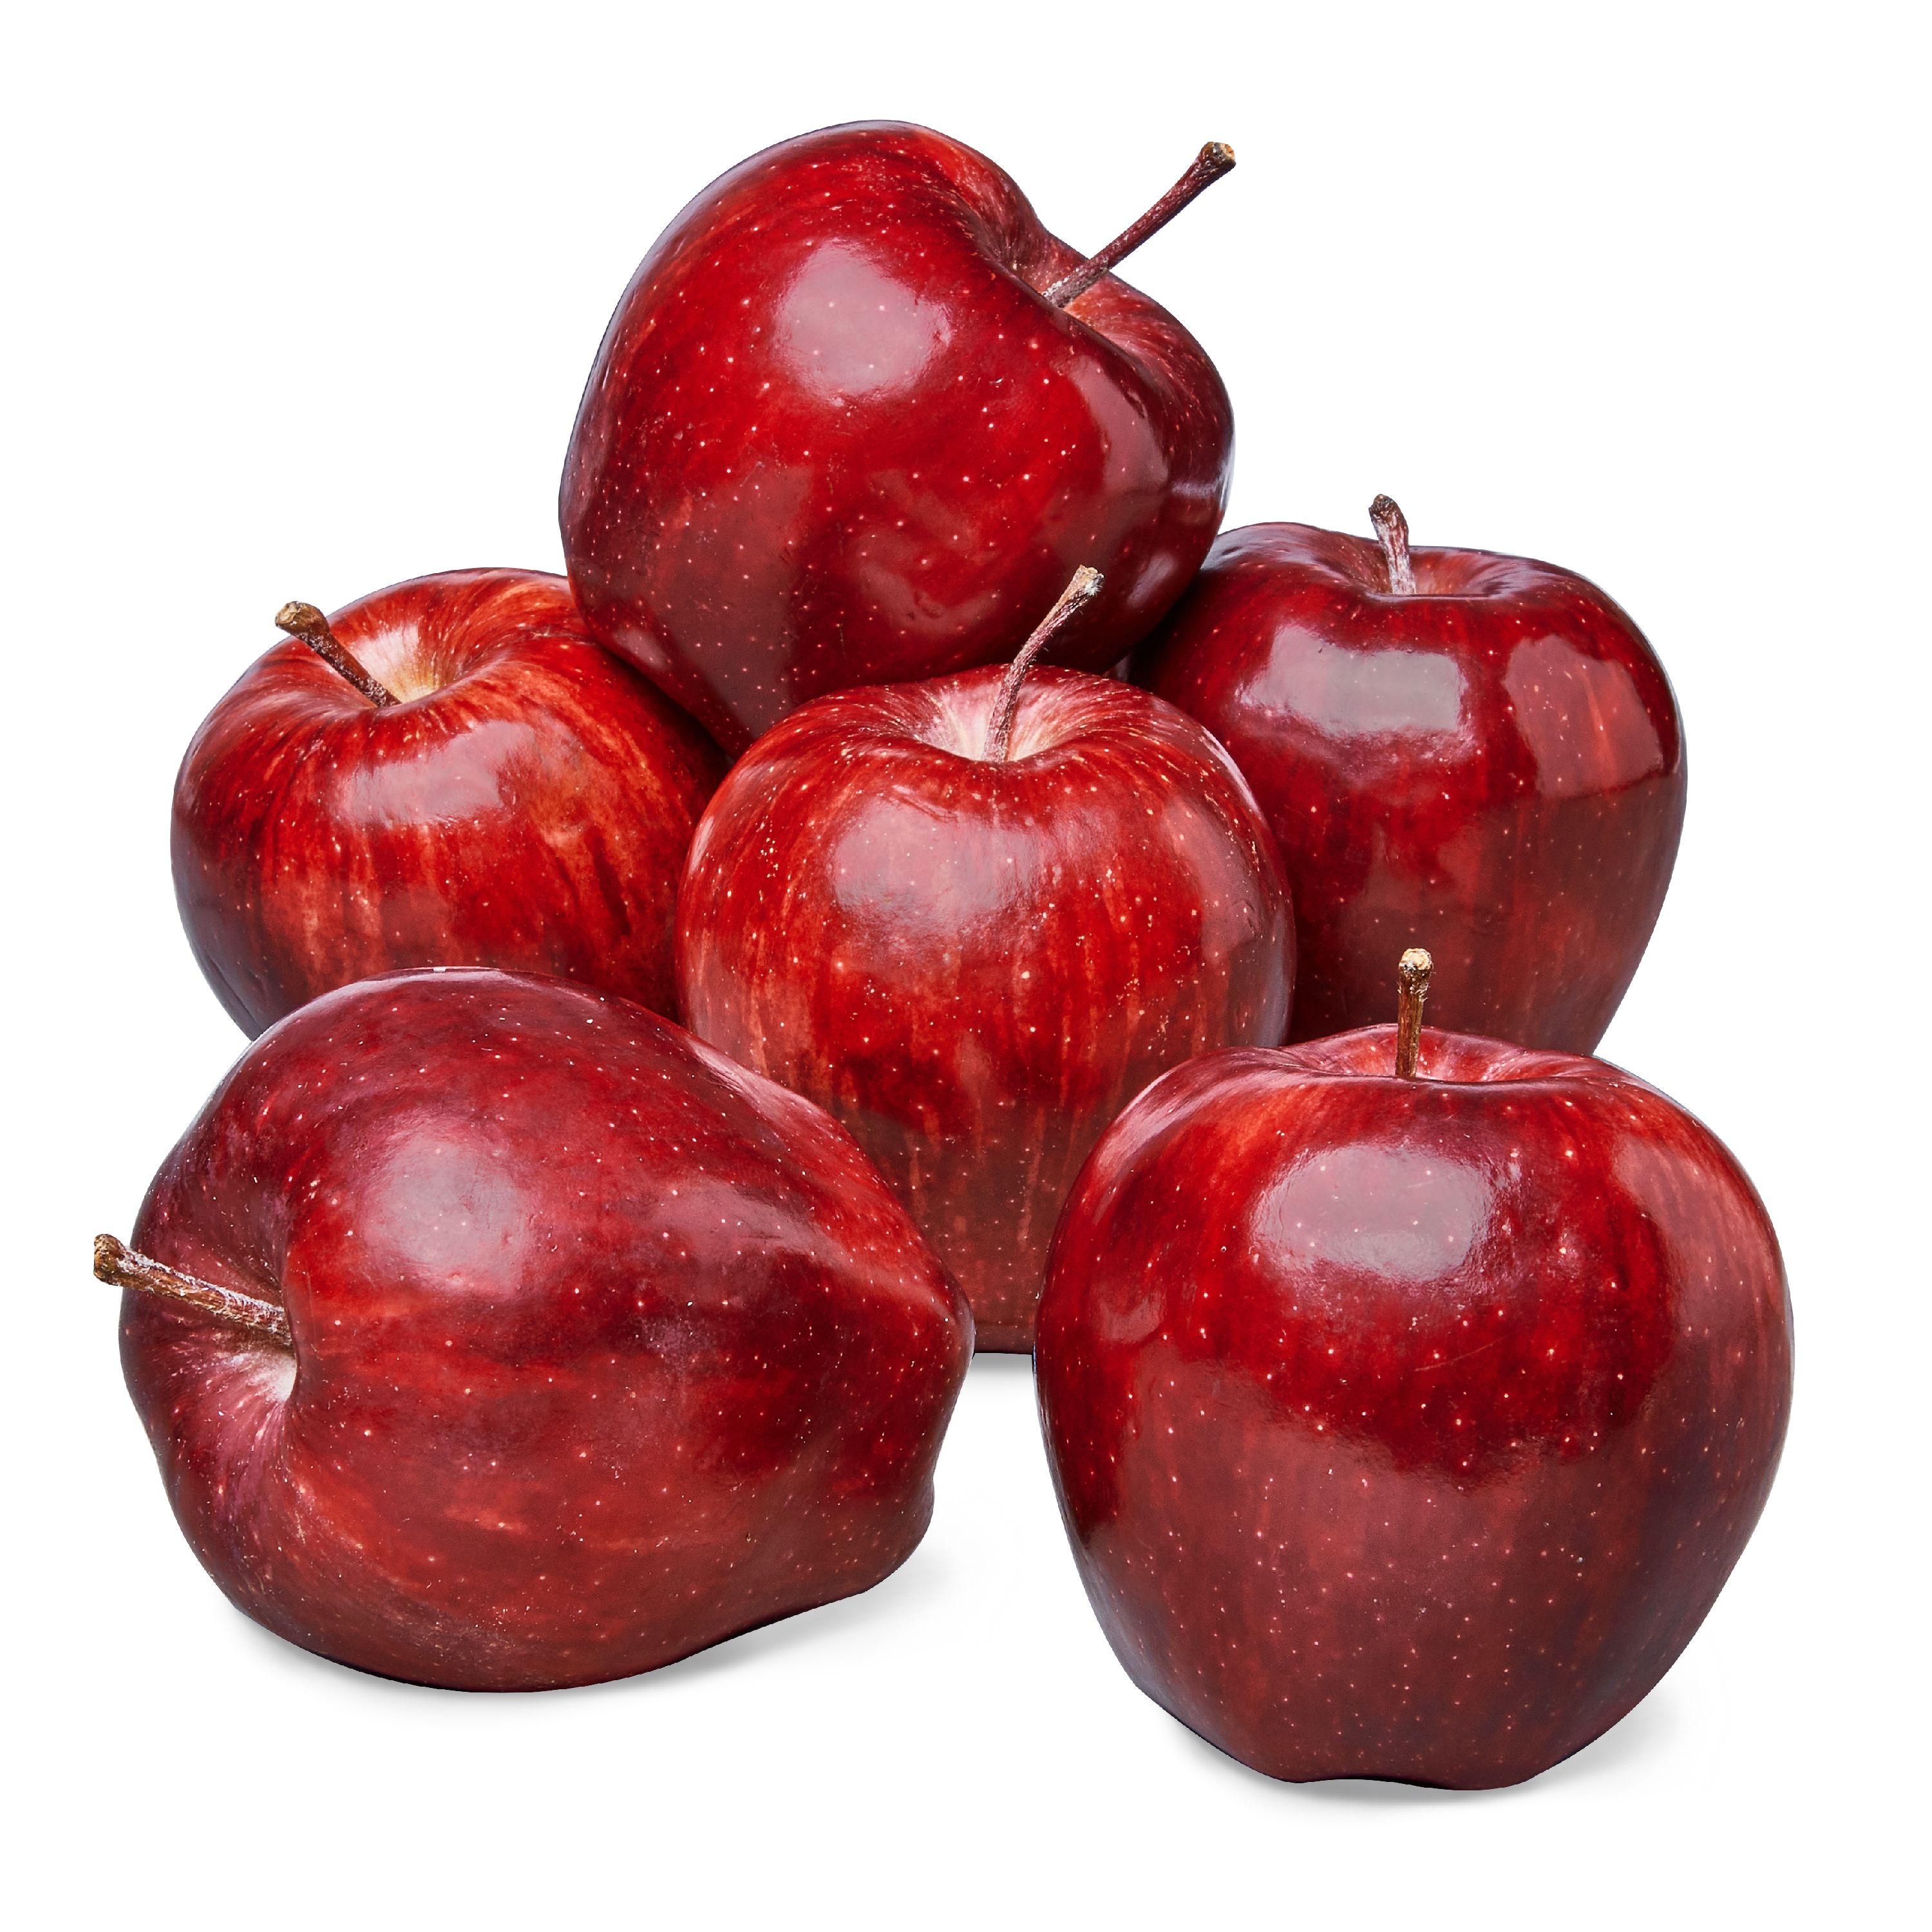 Fresh Red Delicious Apple, Each - image 2 of 7